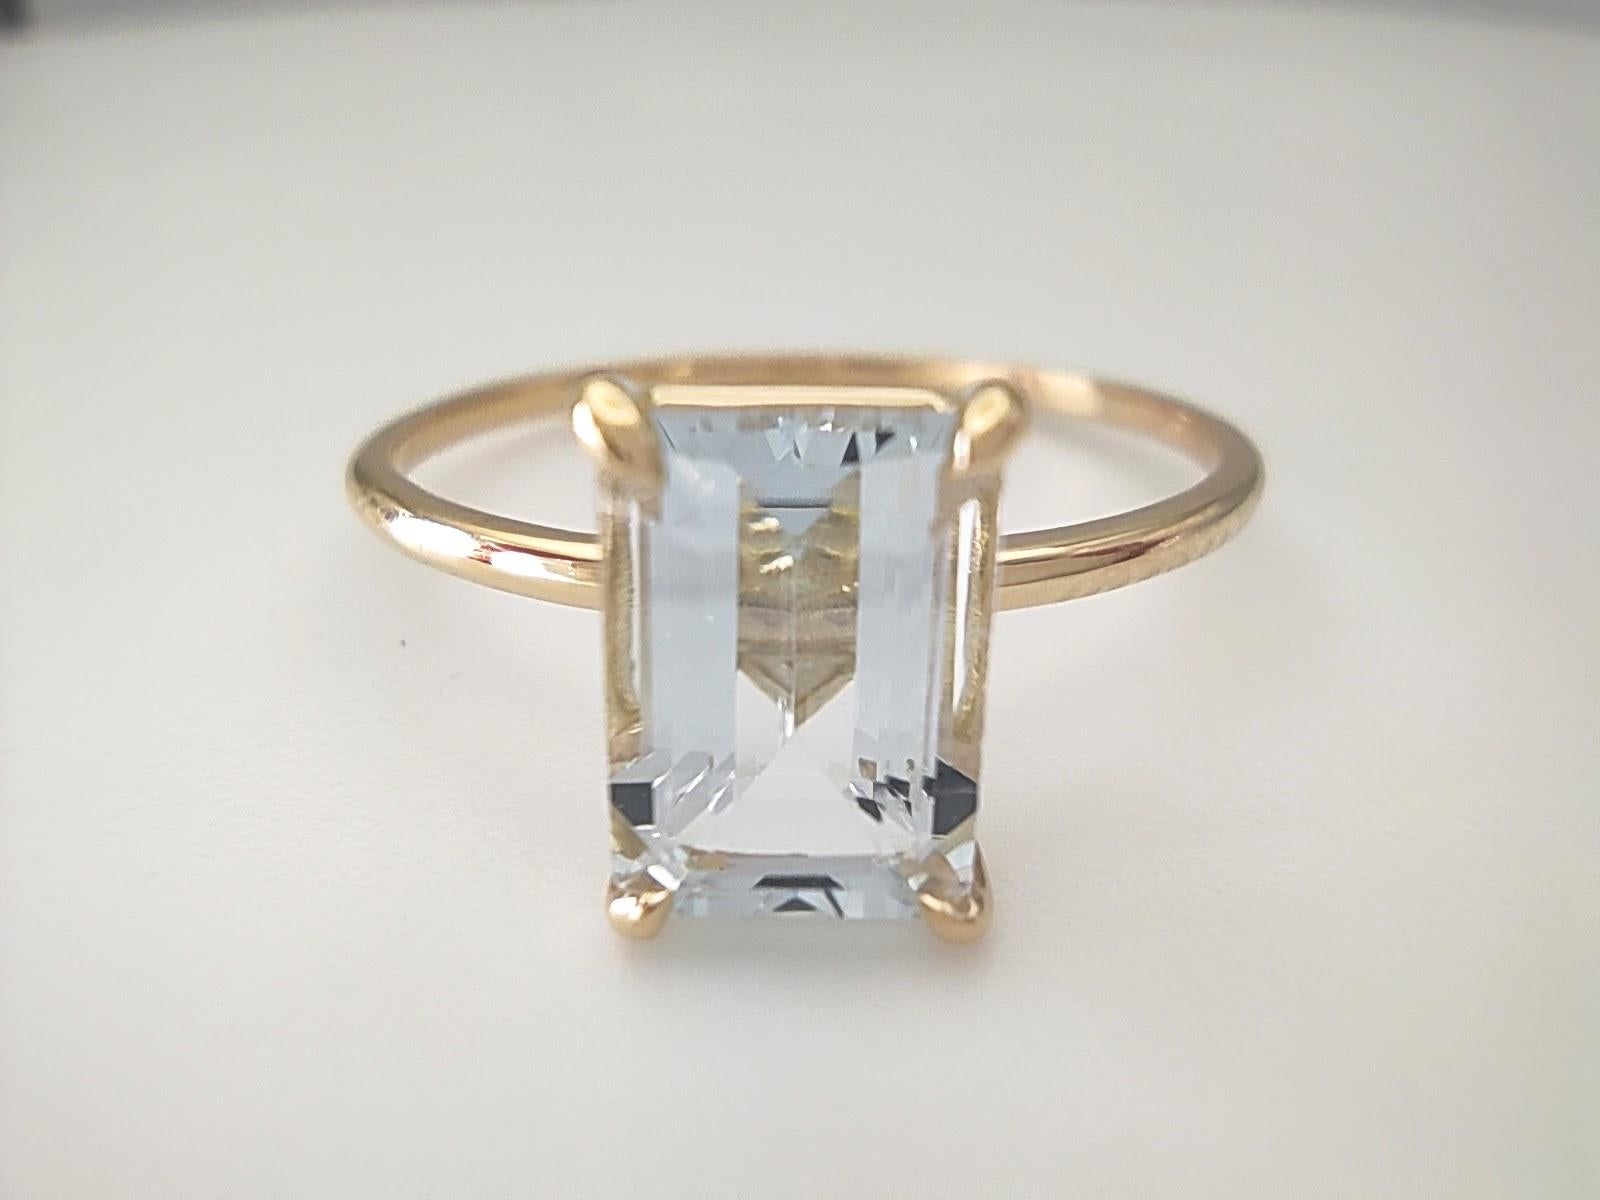 Captivating 18K Gold Solitaire Ring featuring a 0.83 Ct. Emerald-Cut Aquamarine For Sale 1